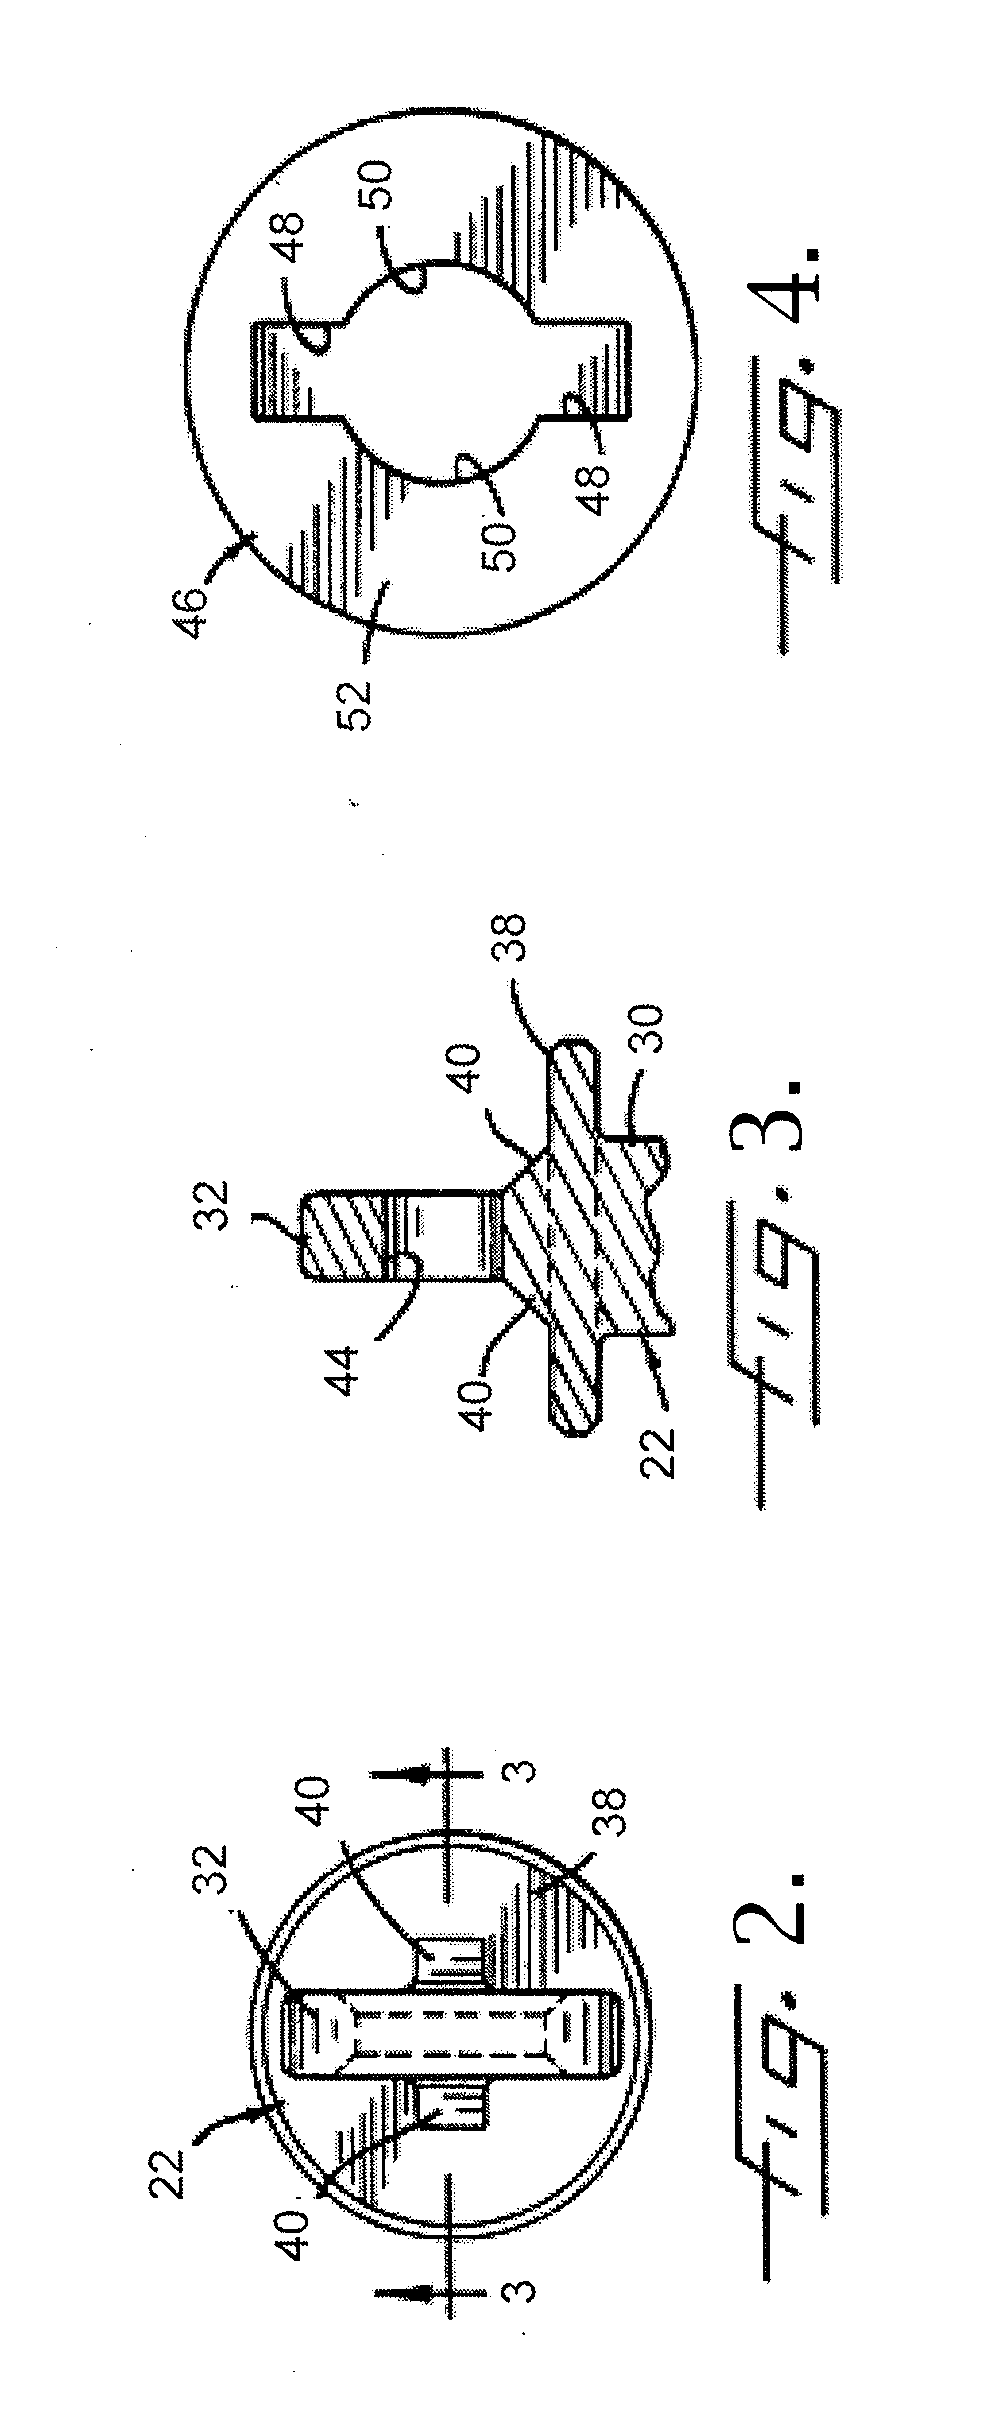 Thermal clip attachment apparatus for masonry anchors and methods thereof